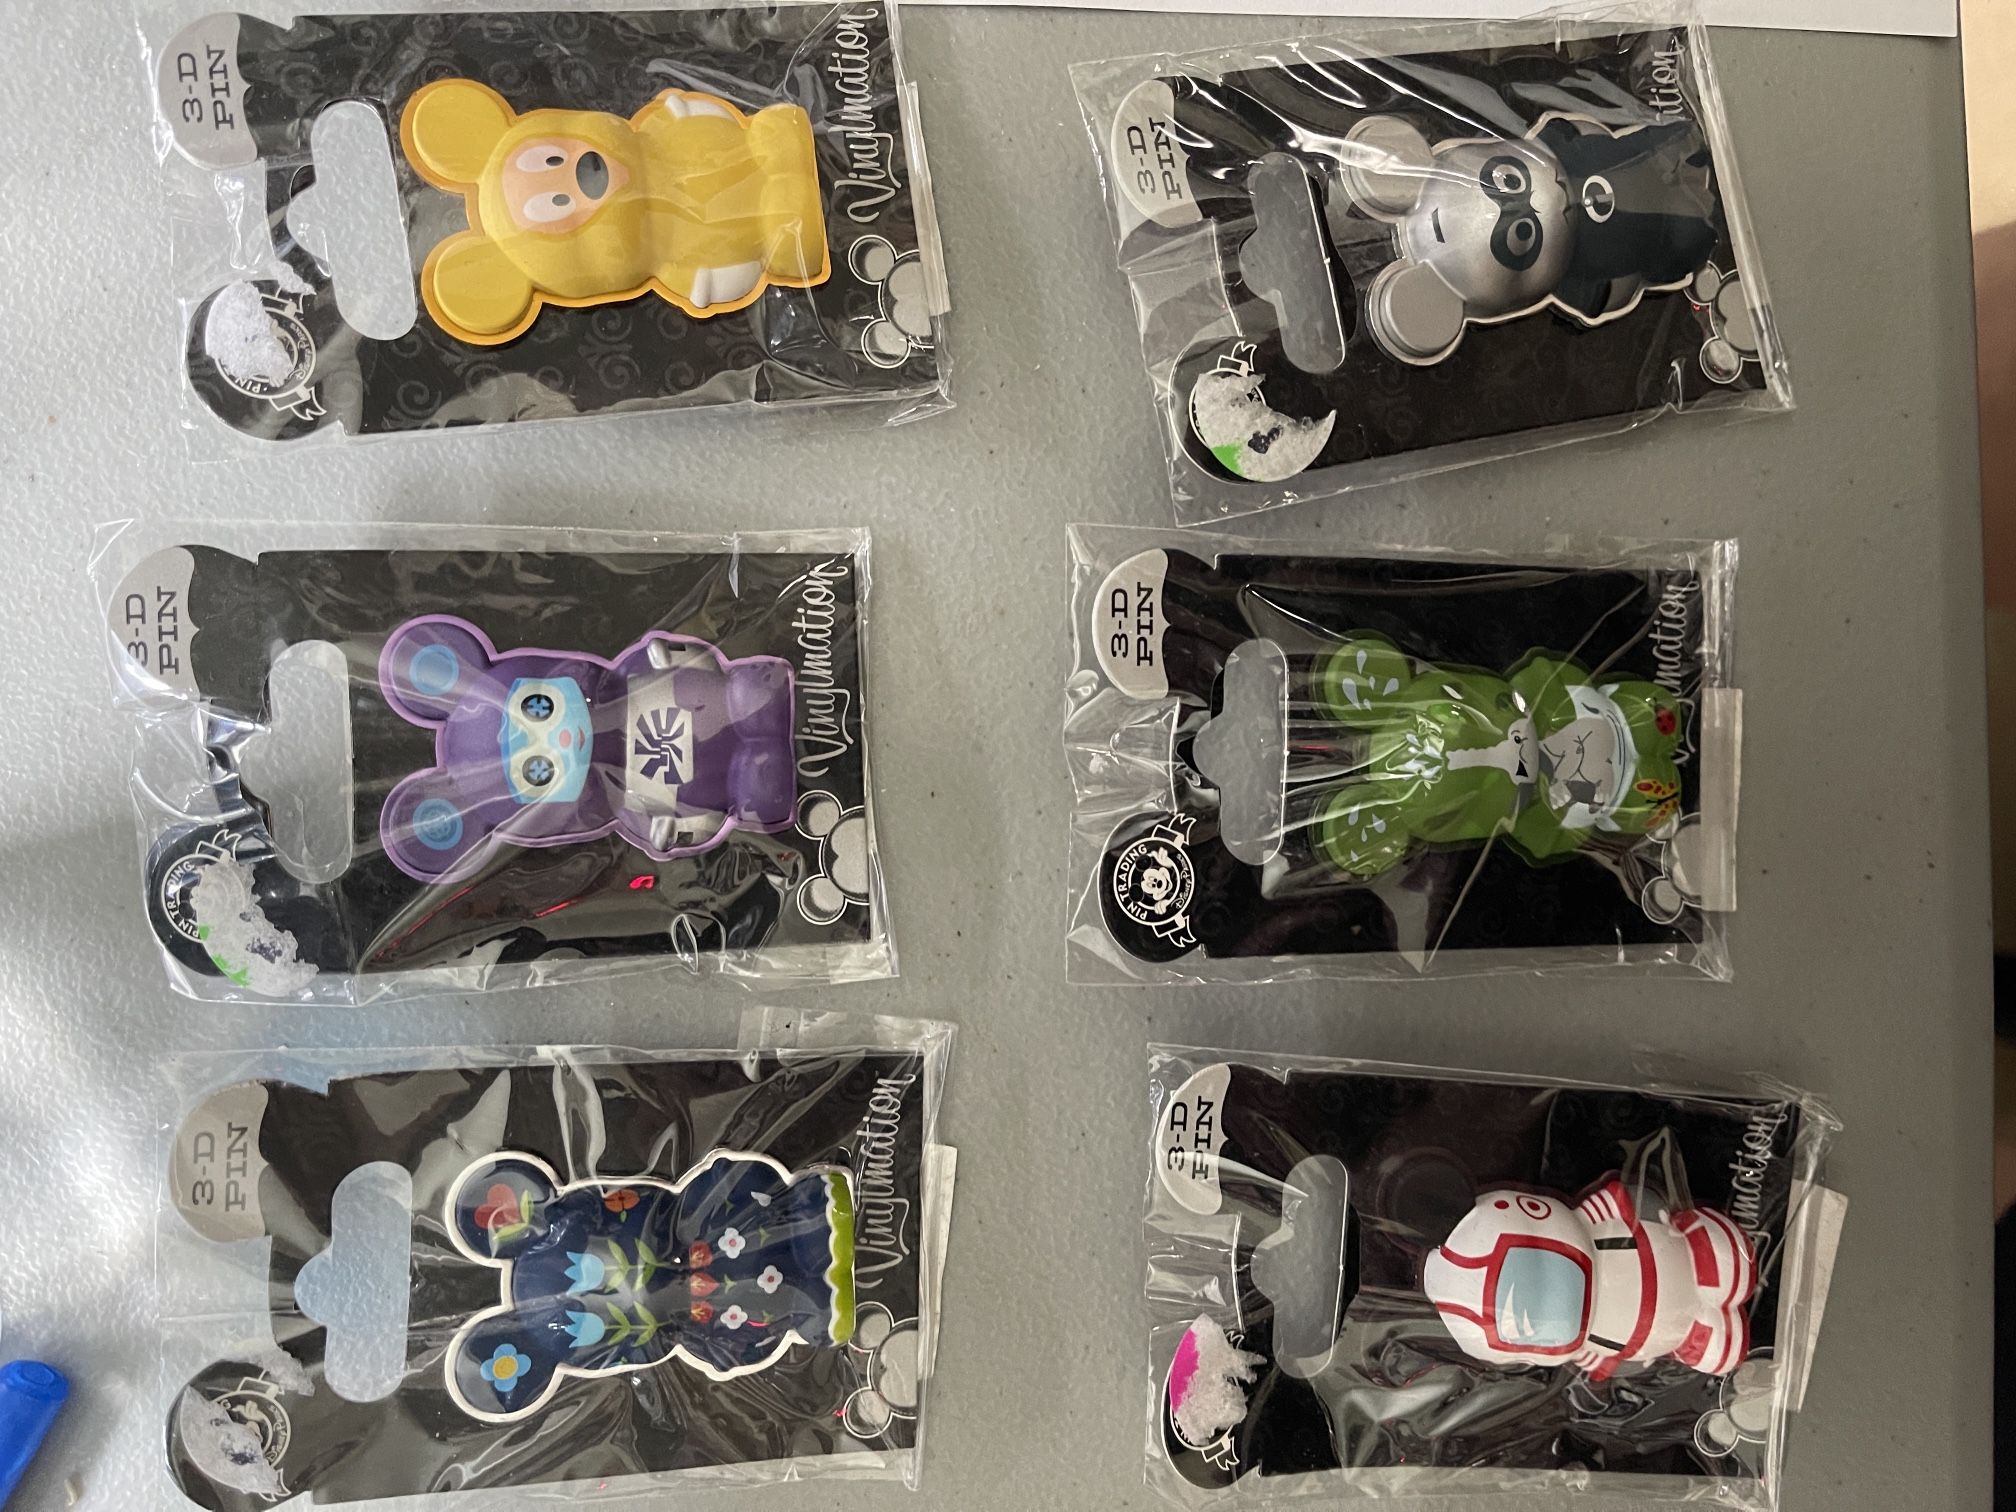 Disney Vinylmation 3d Pins. For Sale Or trade